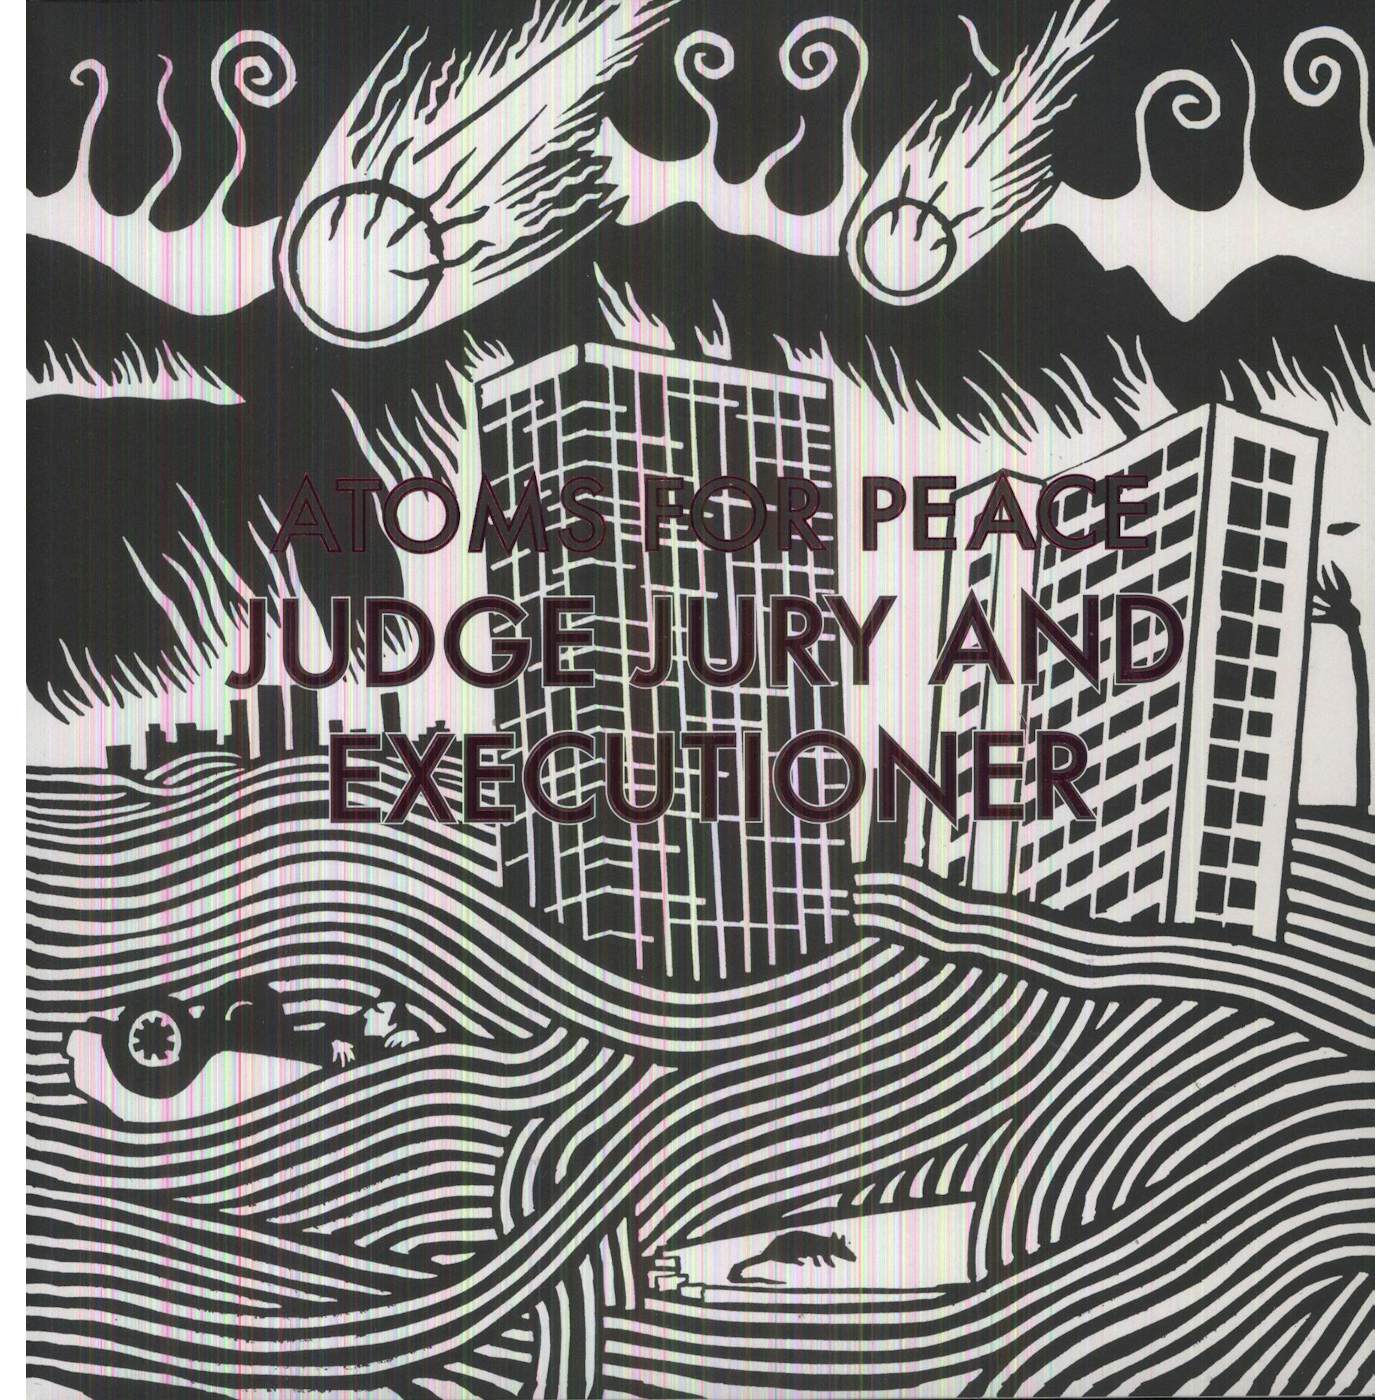 Atoms For Peace Judge Jury And Executioner Vinyl Record